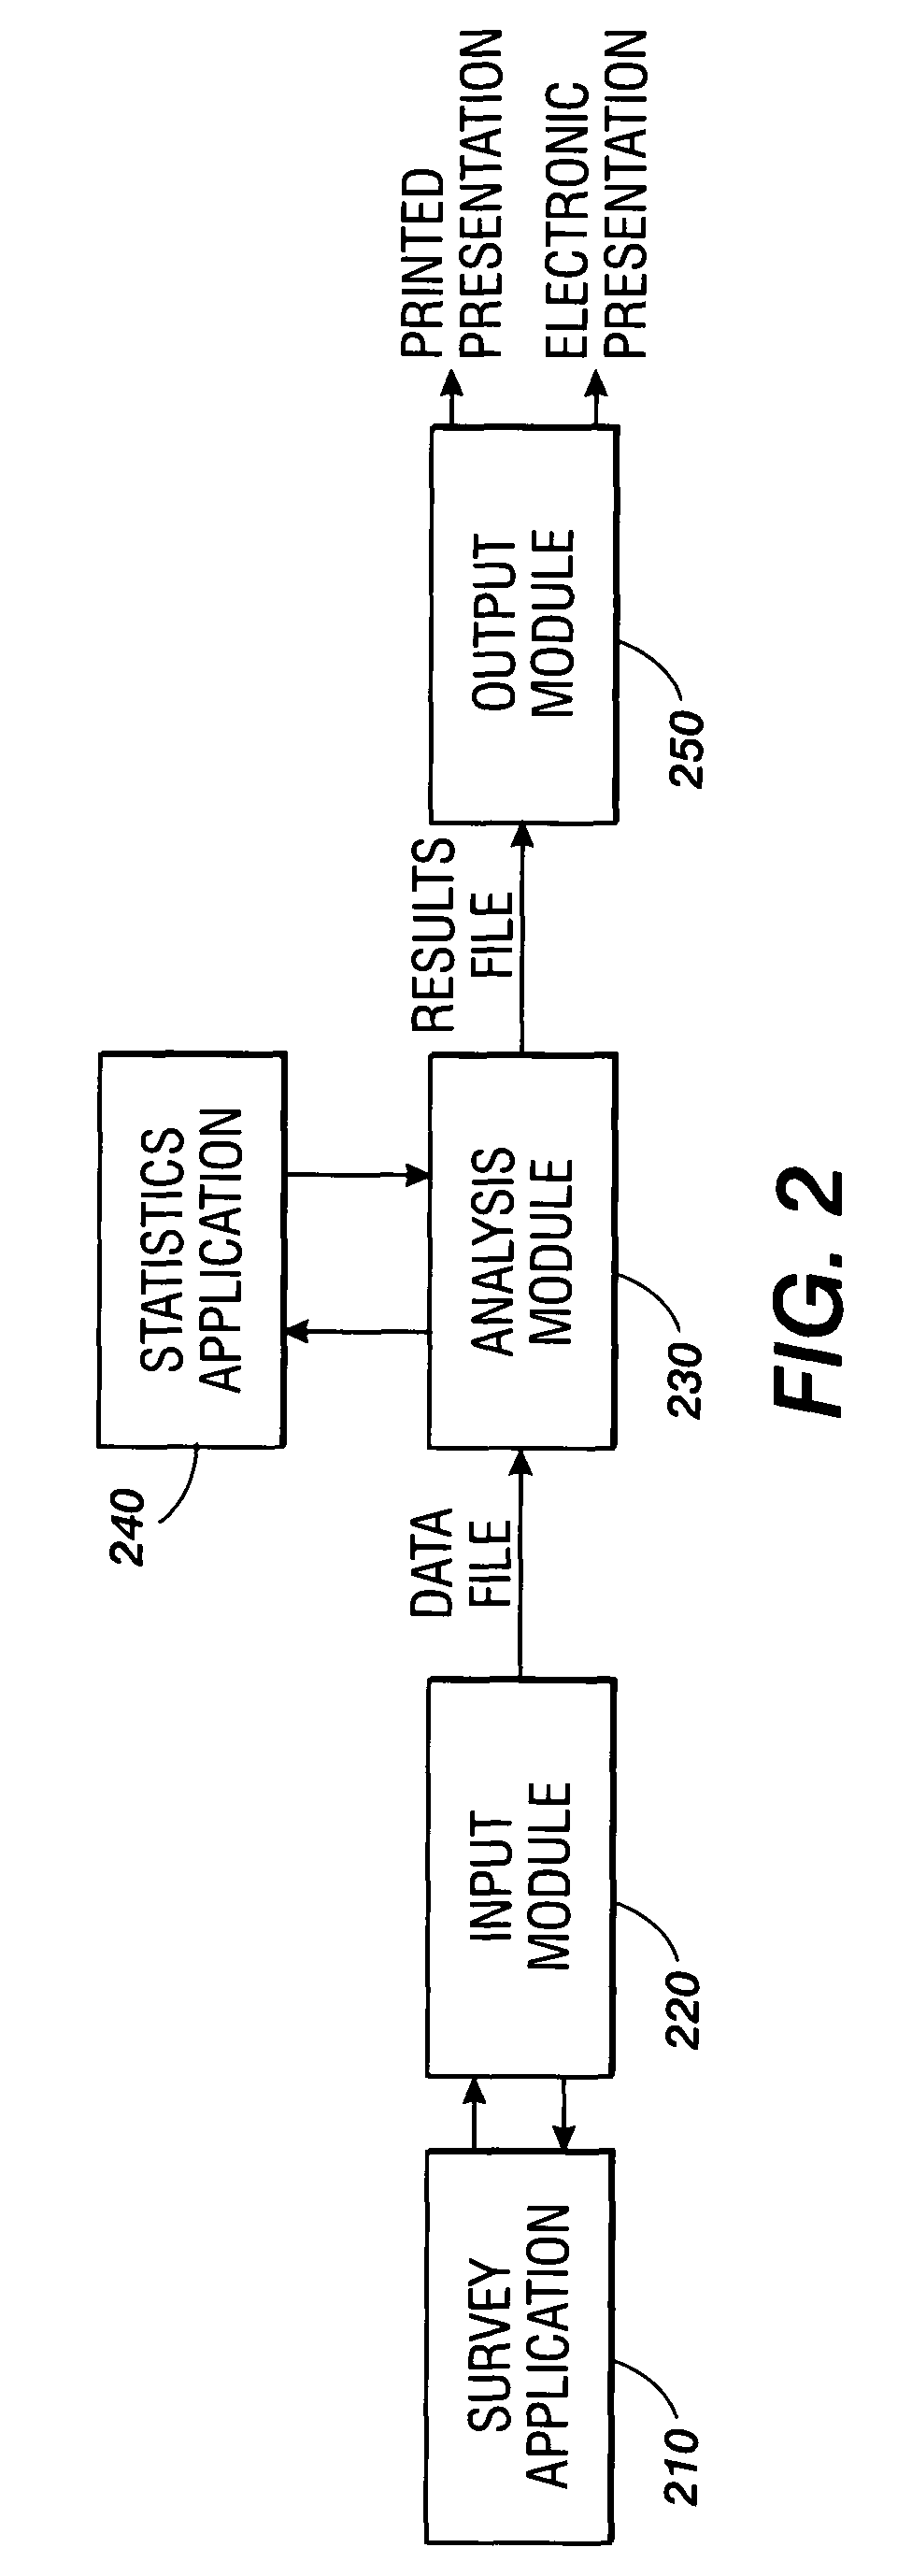 Method and system for image evaluation data analysis